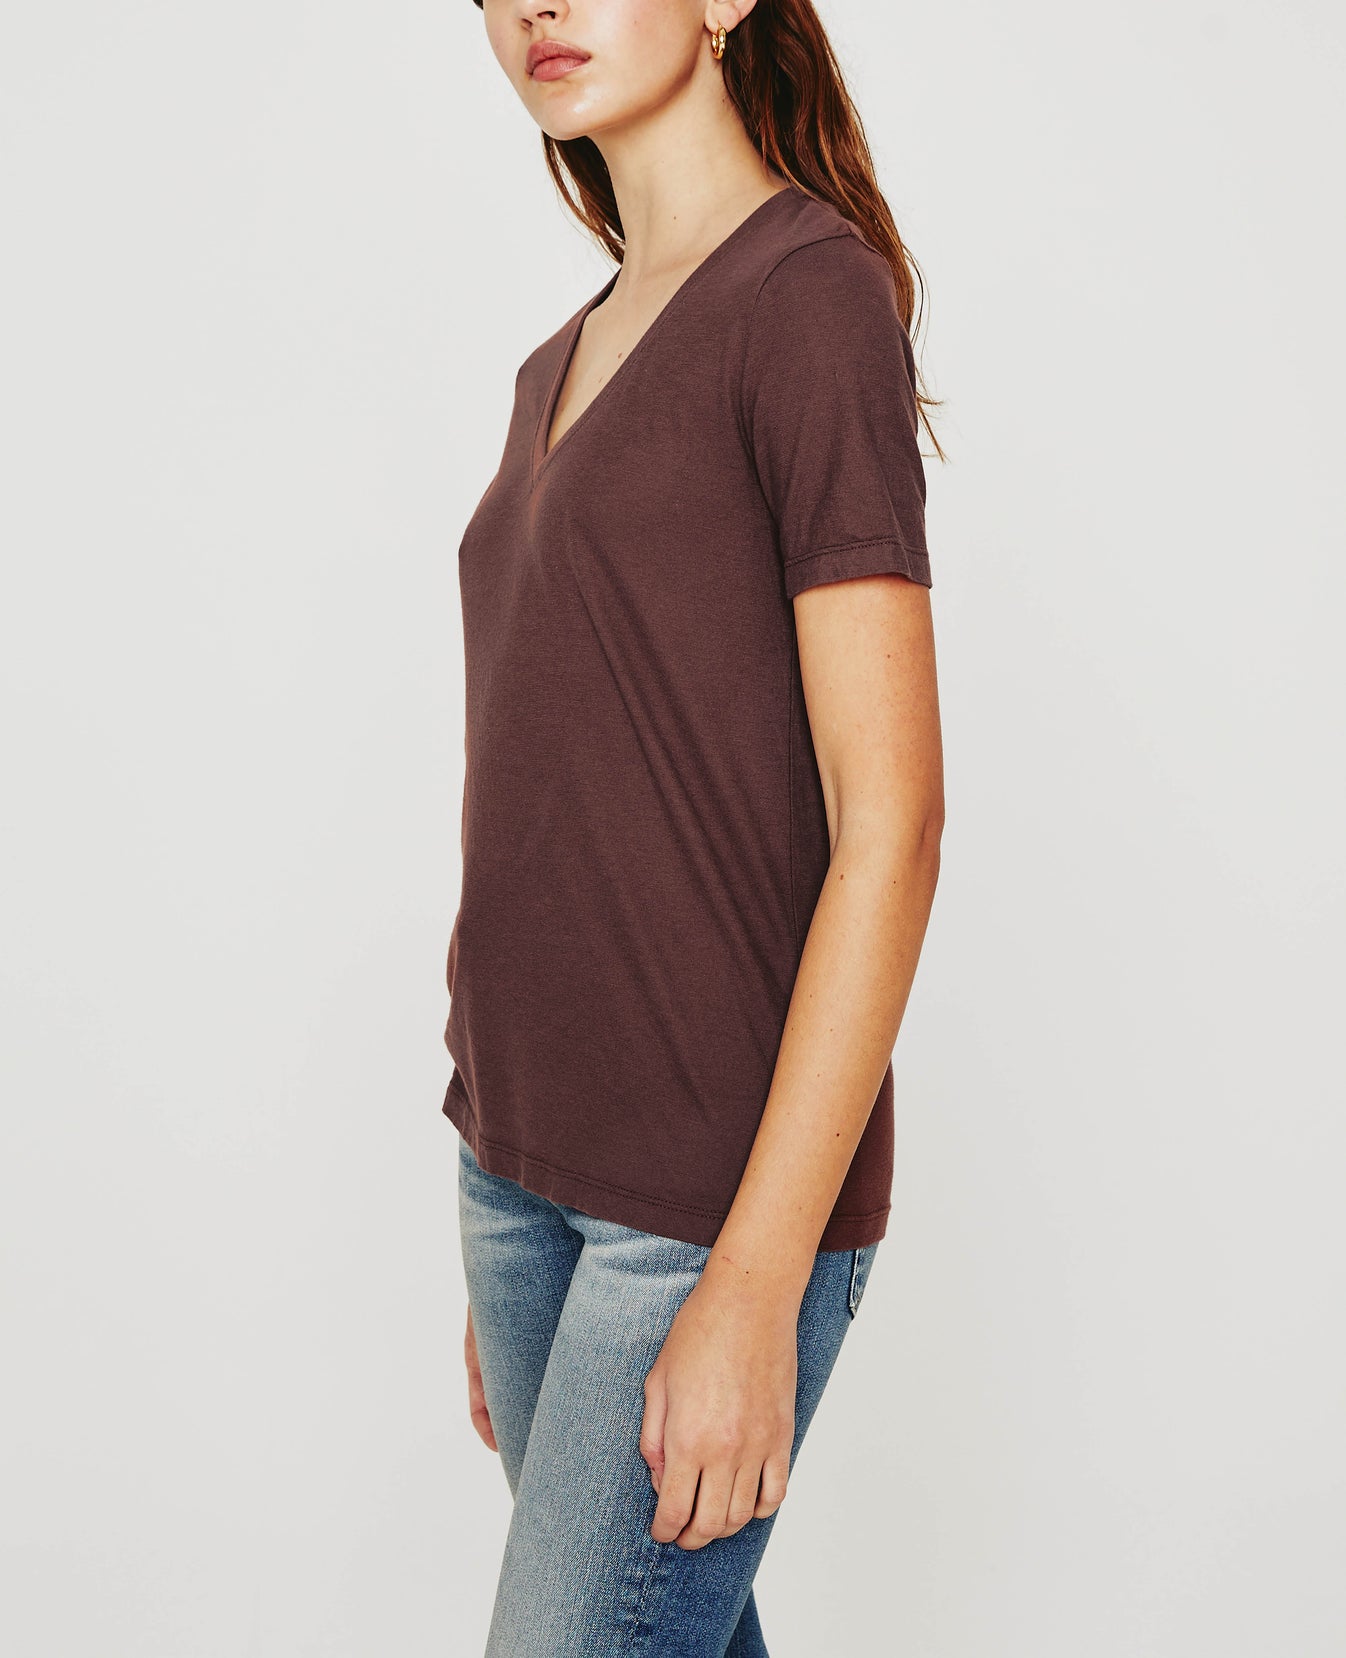 Jagger Vee Passionfruit Classic Fit V-Neck Tee Women Tops Photo 4